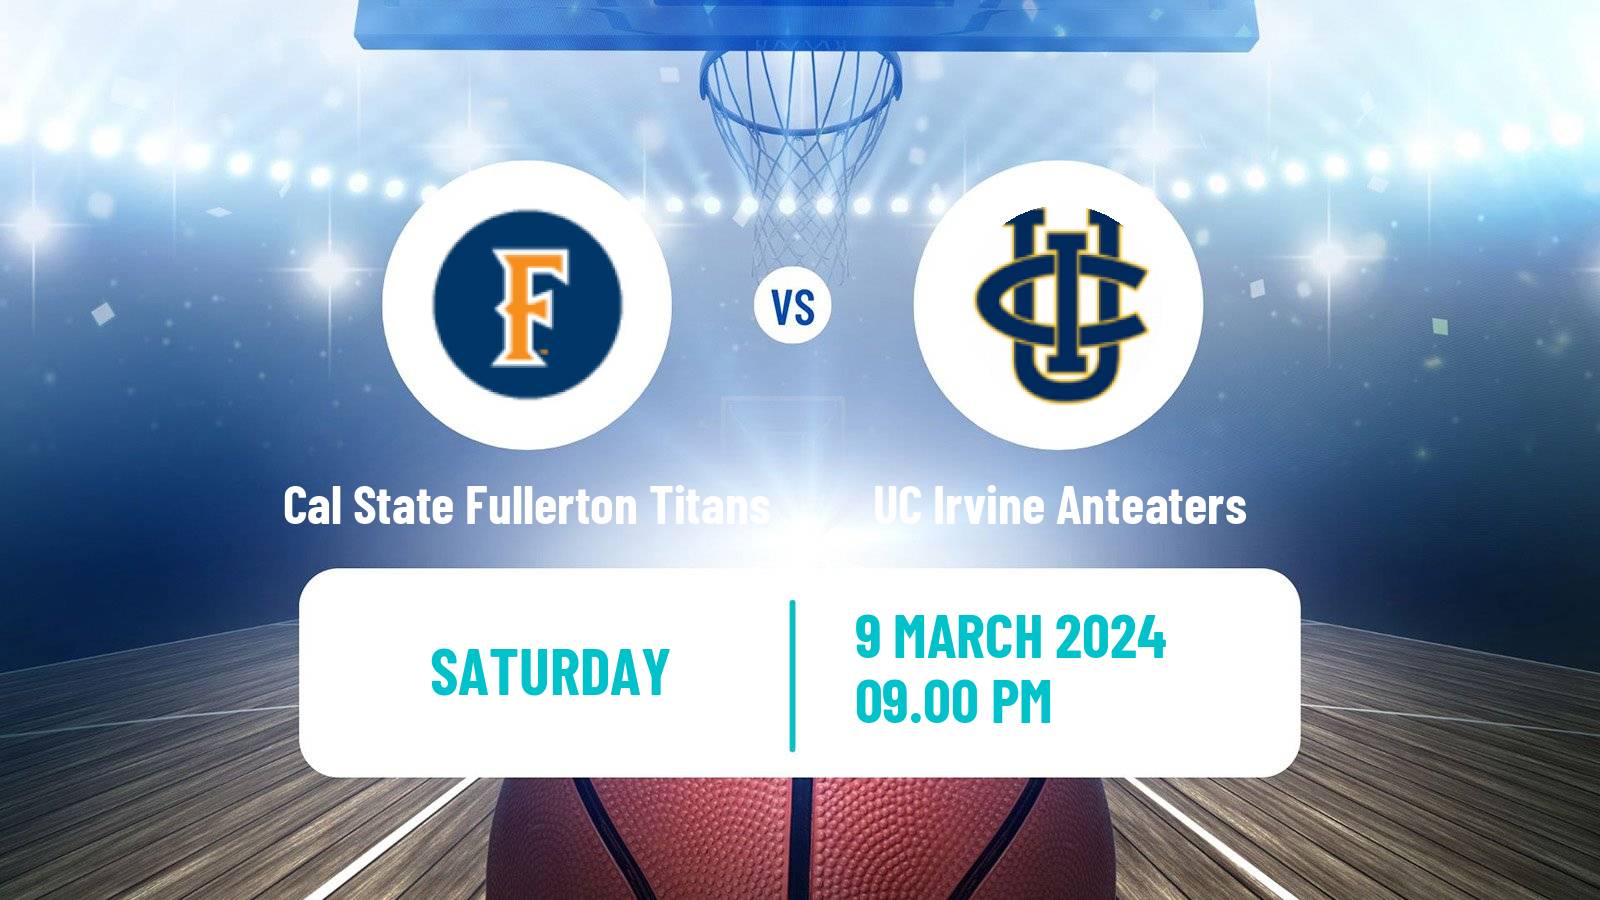 Basketball NCAA College Basketball Cal State Fullerton Titans - UC Irvine Anteaters